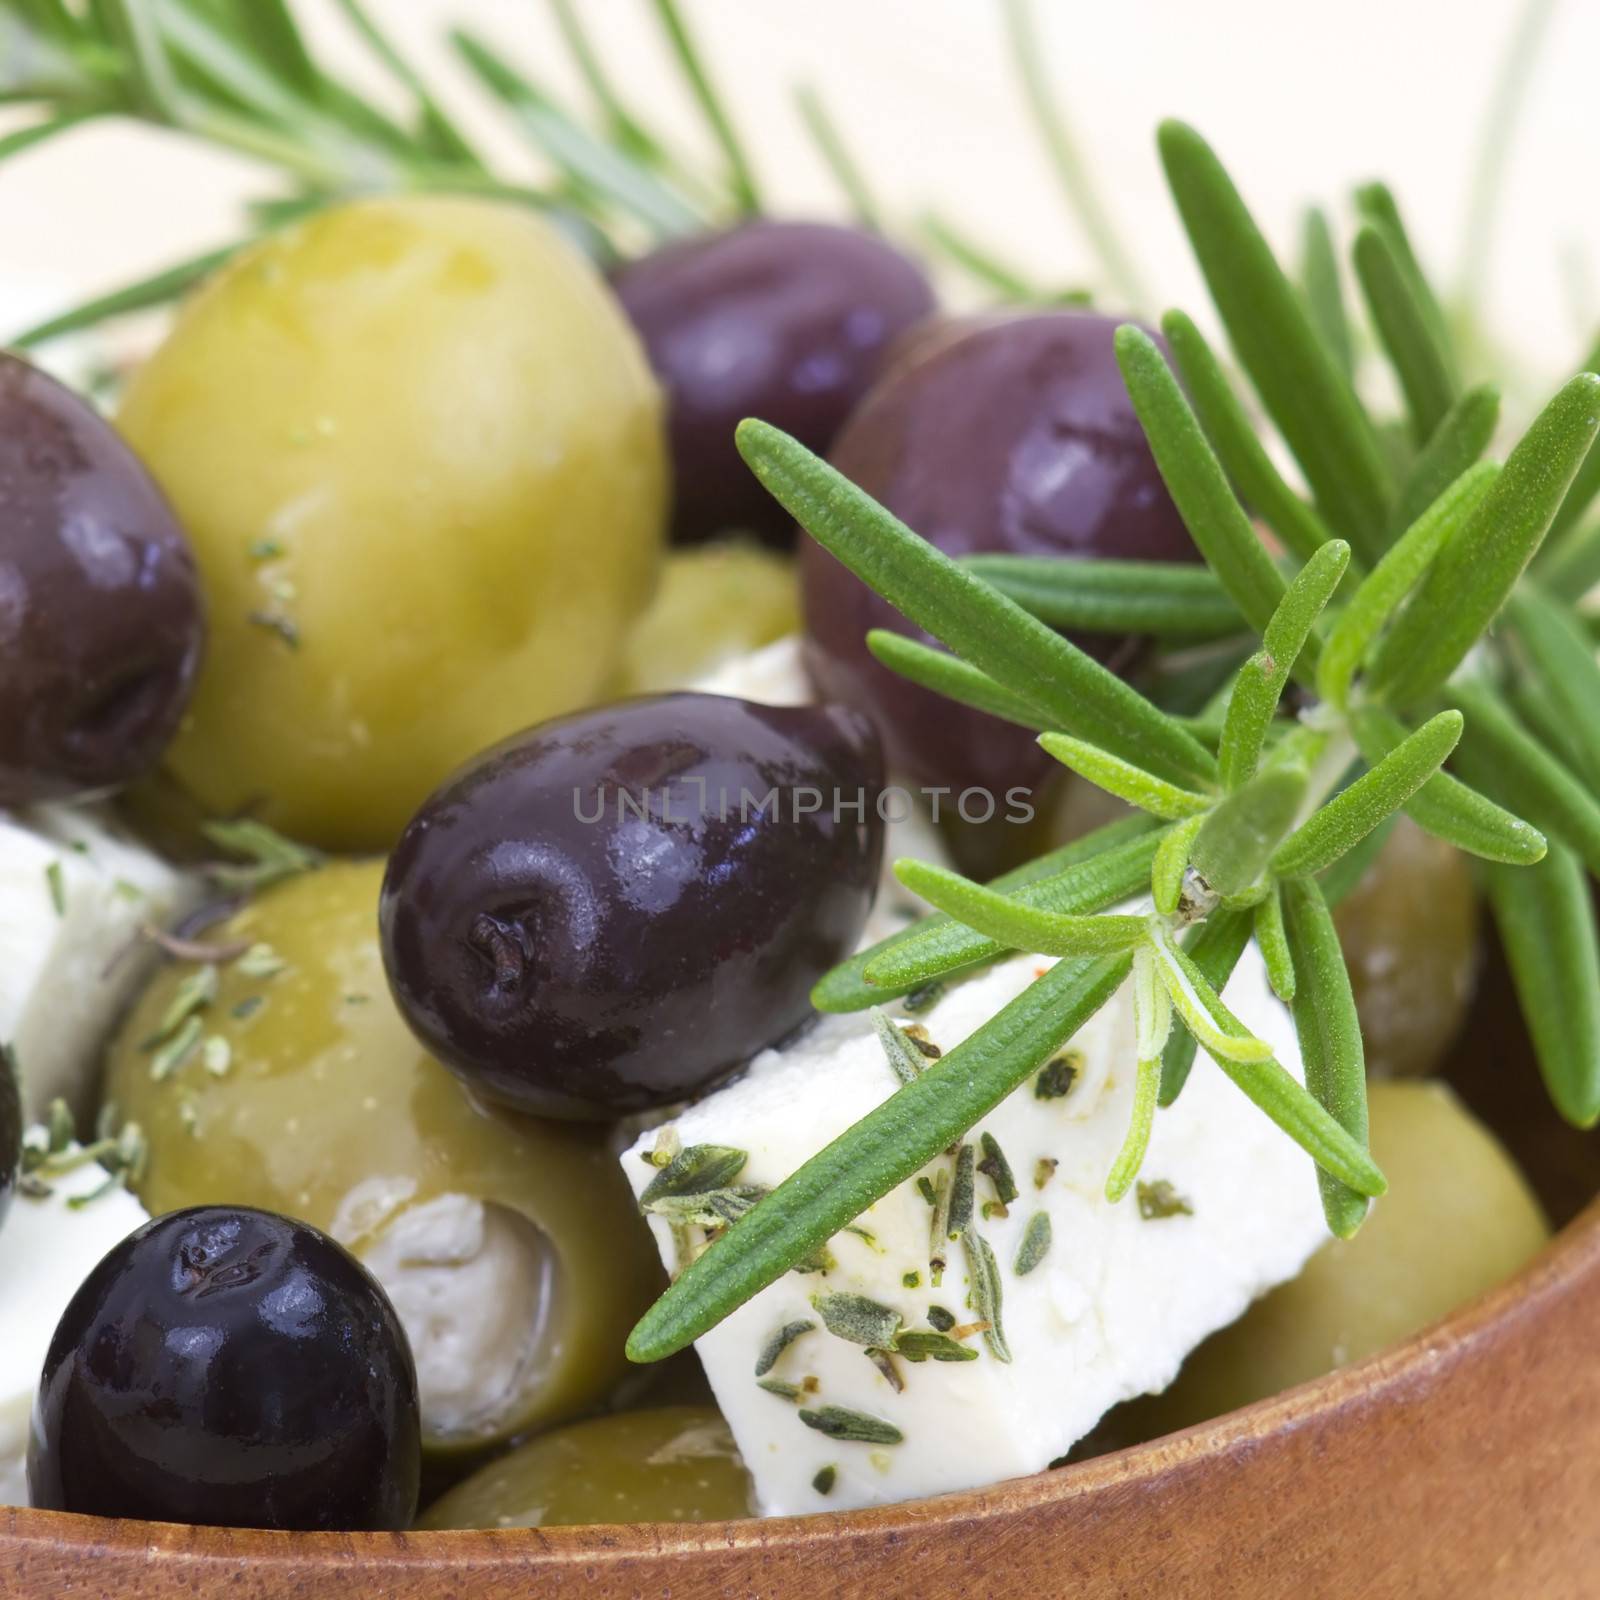 feta cheese and olives with herbs in olive oil by miradrozdowski